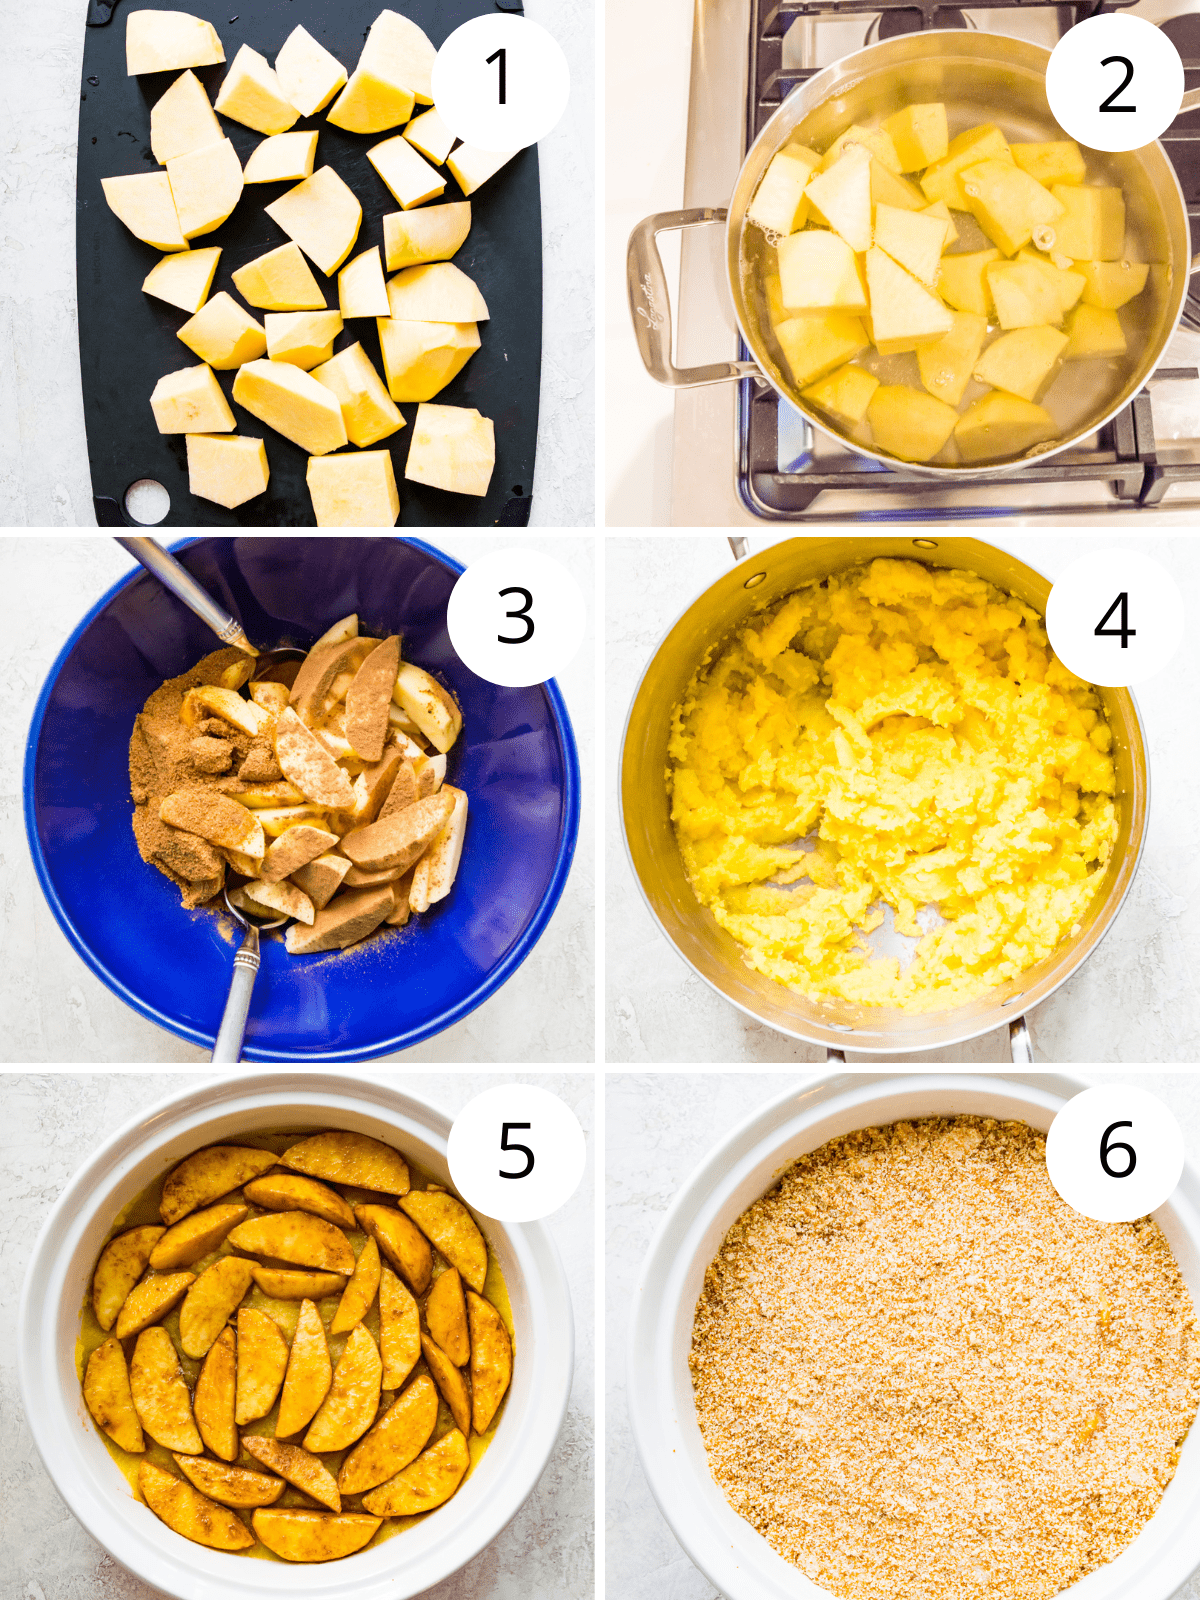 Step by step directions for making a turnip and apple casserole in a large casserole dish.